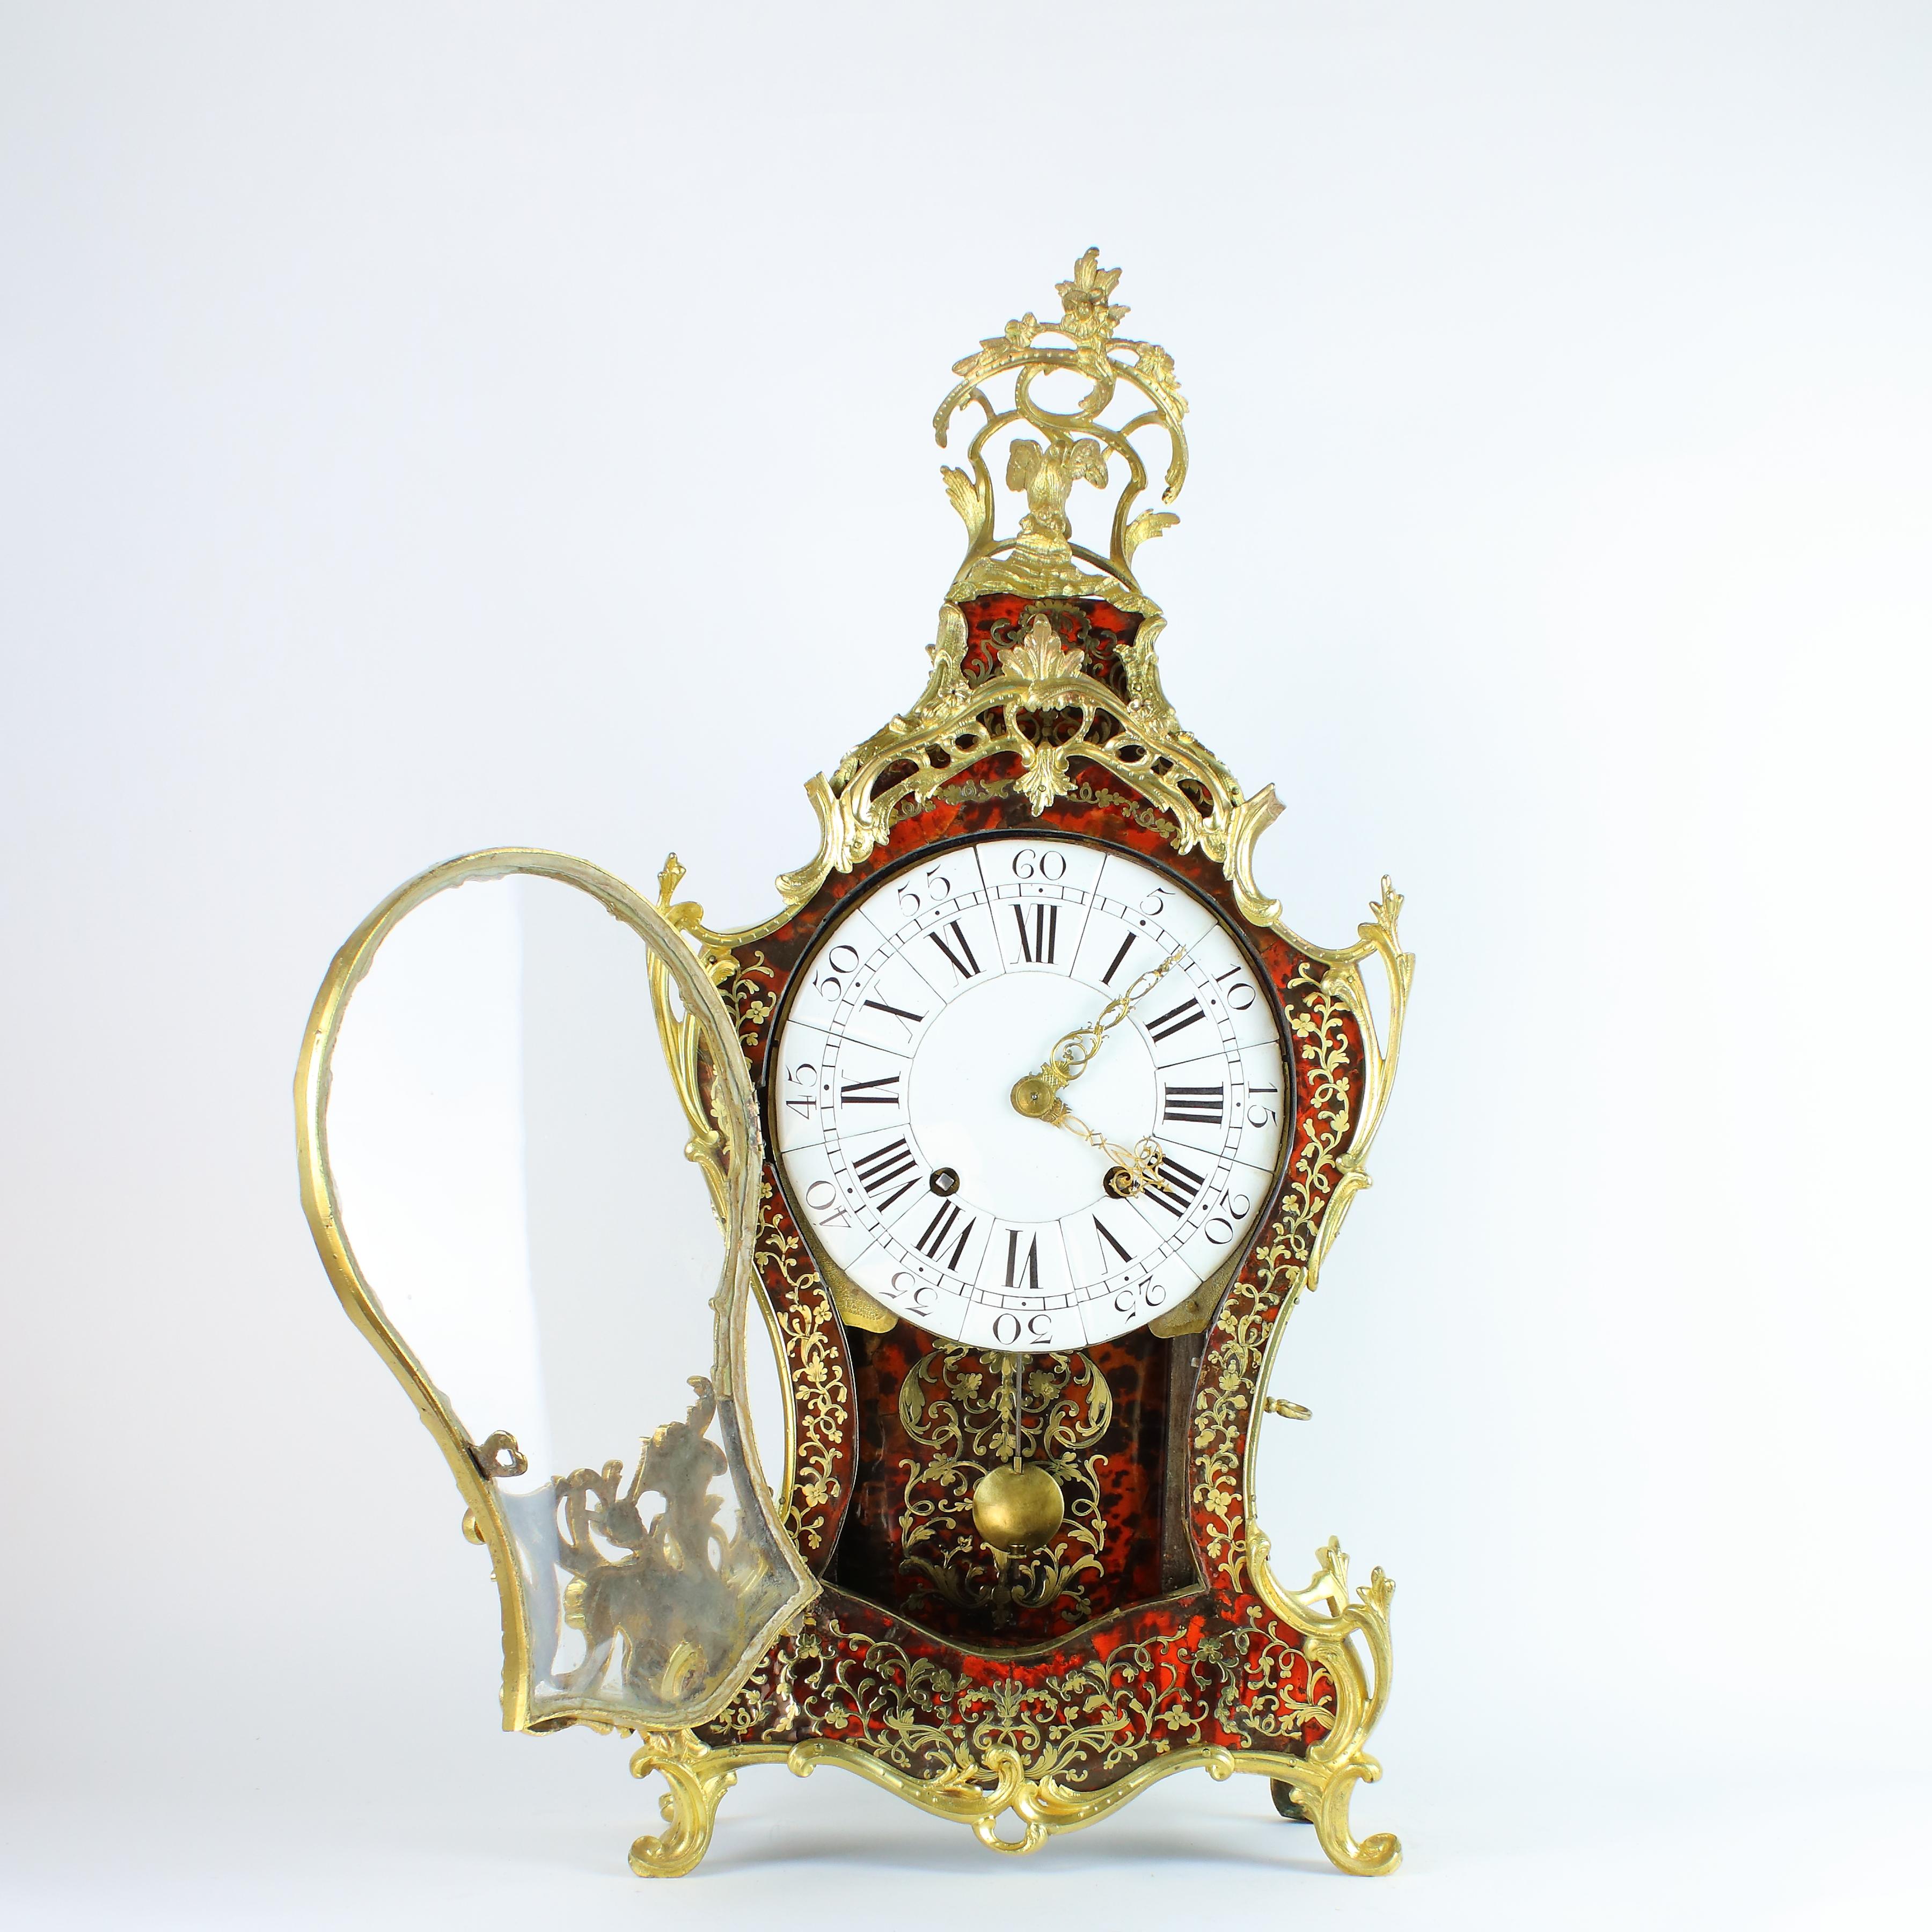 Early 18th century French Boulle gilt bronze wall console cartel clock, signed 